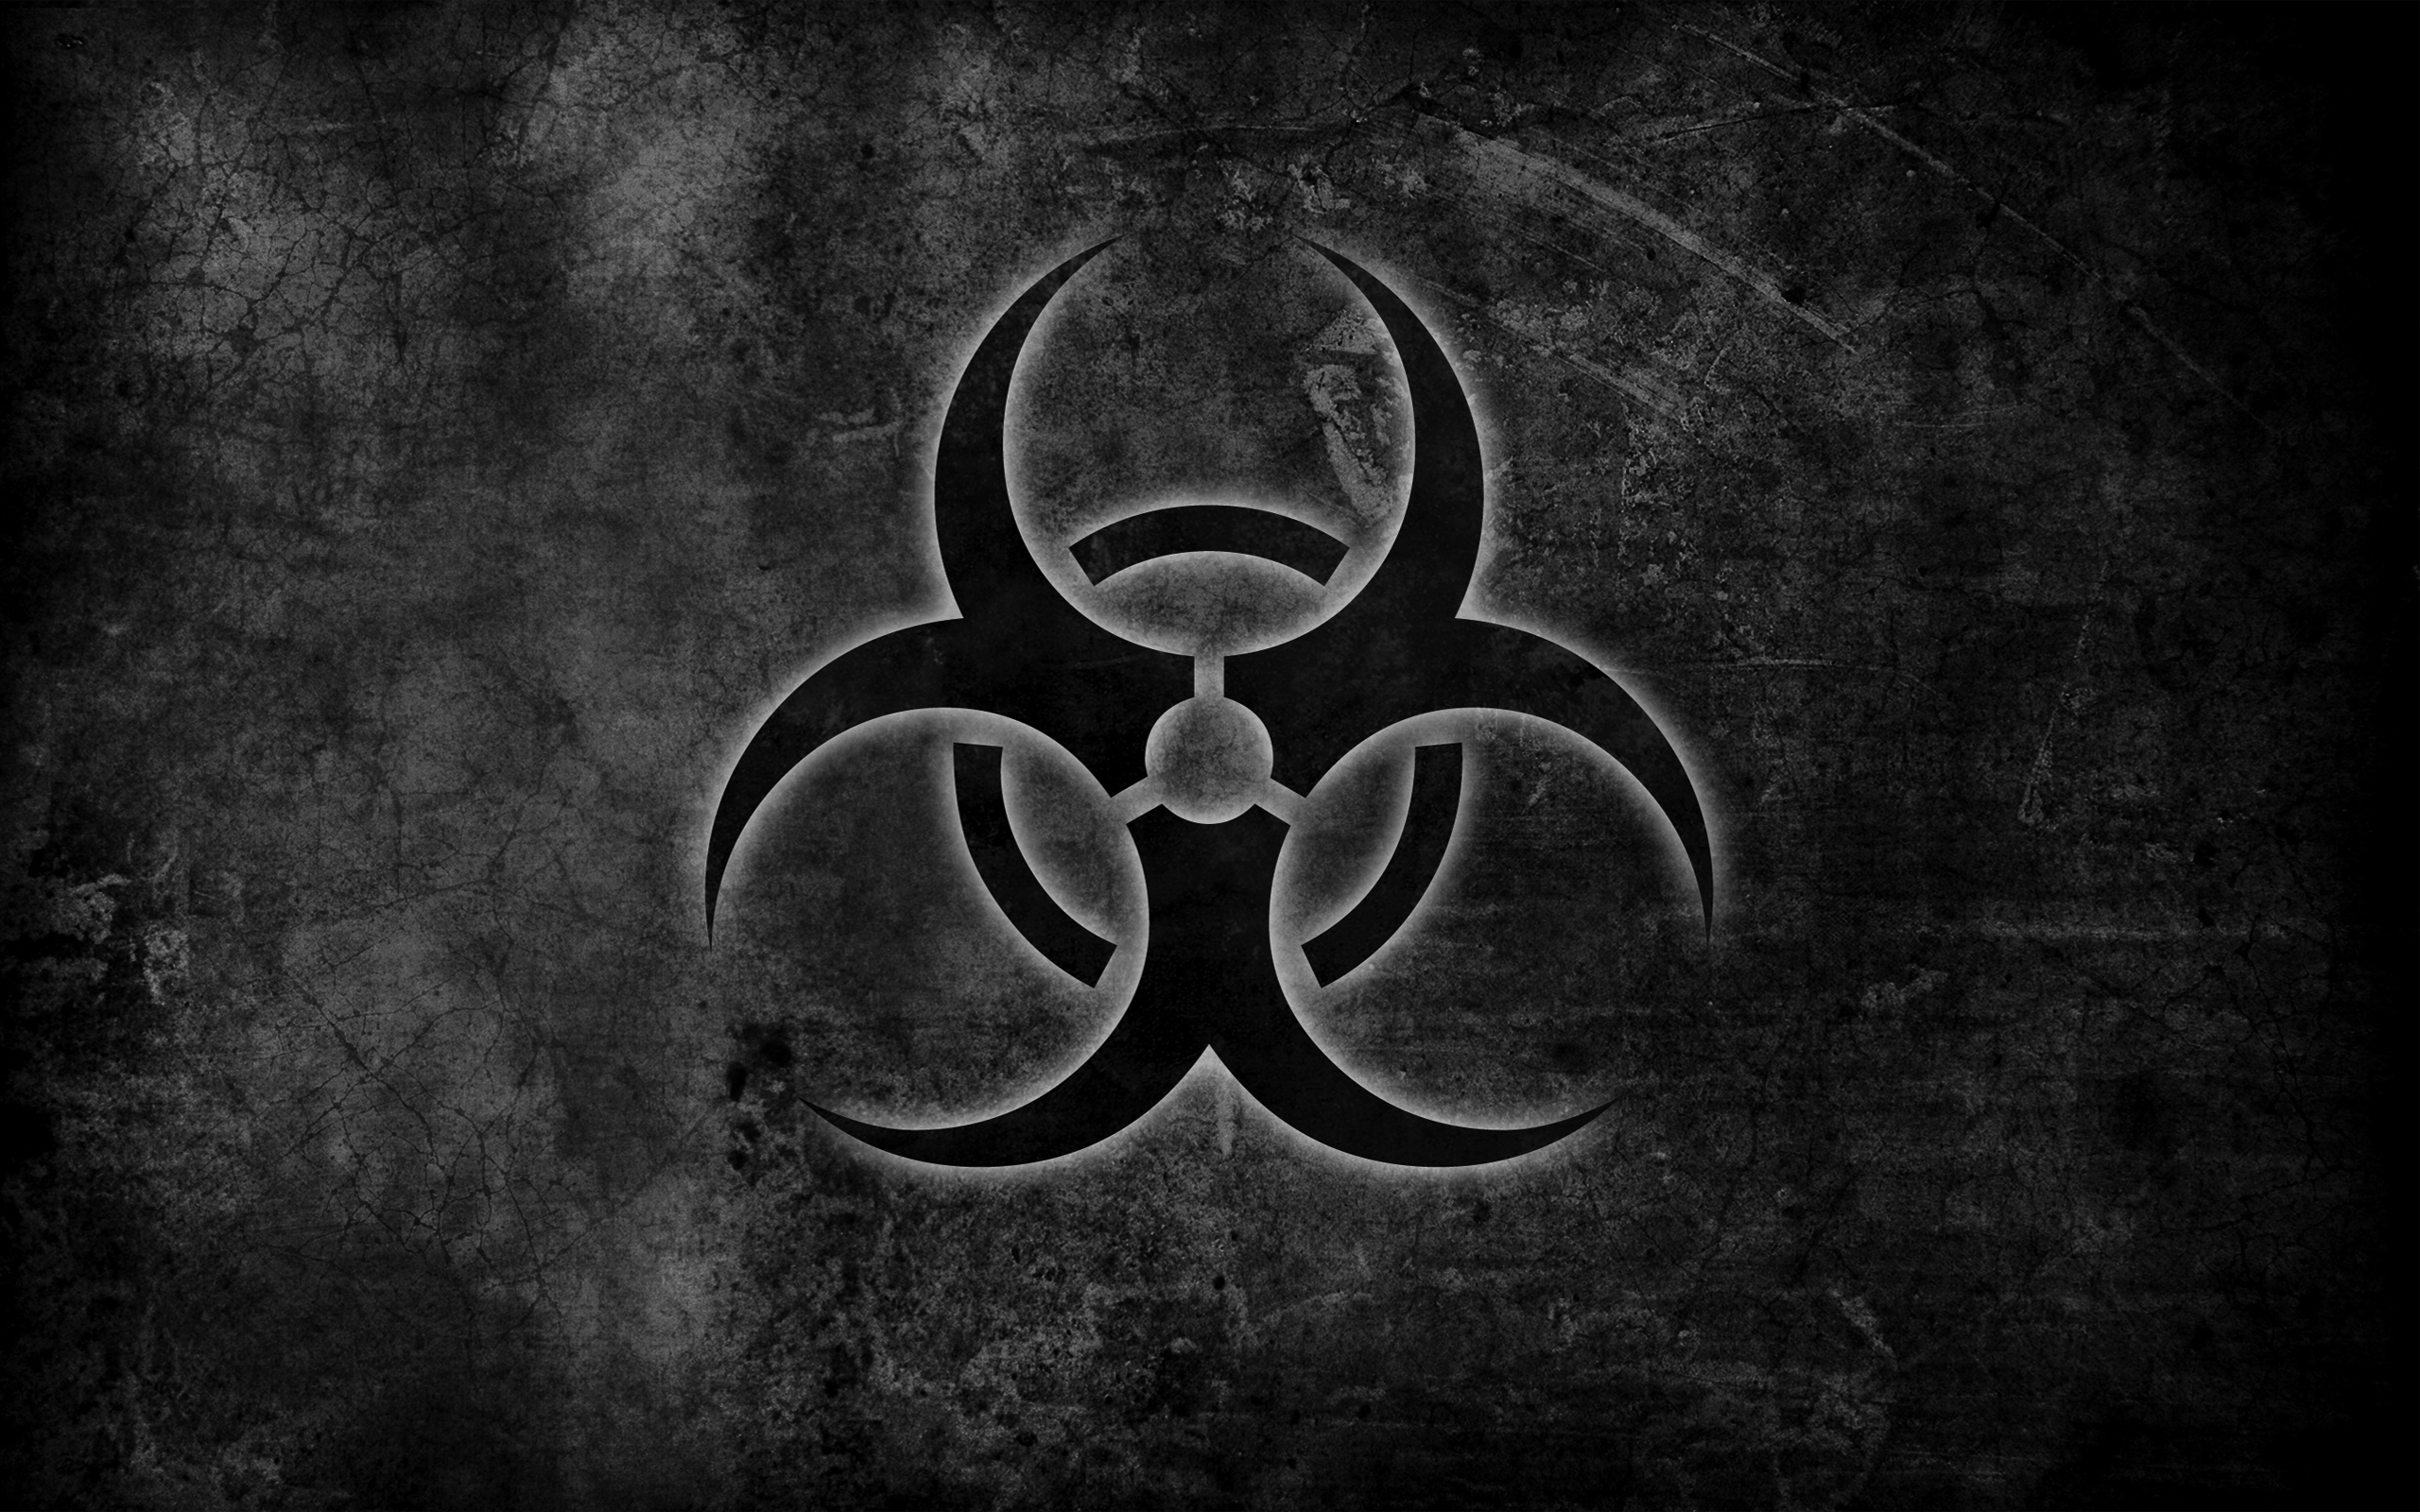 Toxic biohazard presets not available